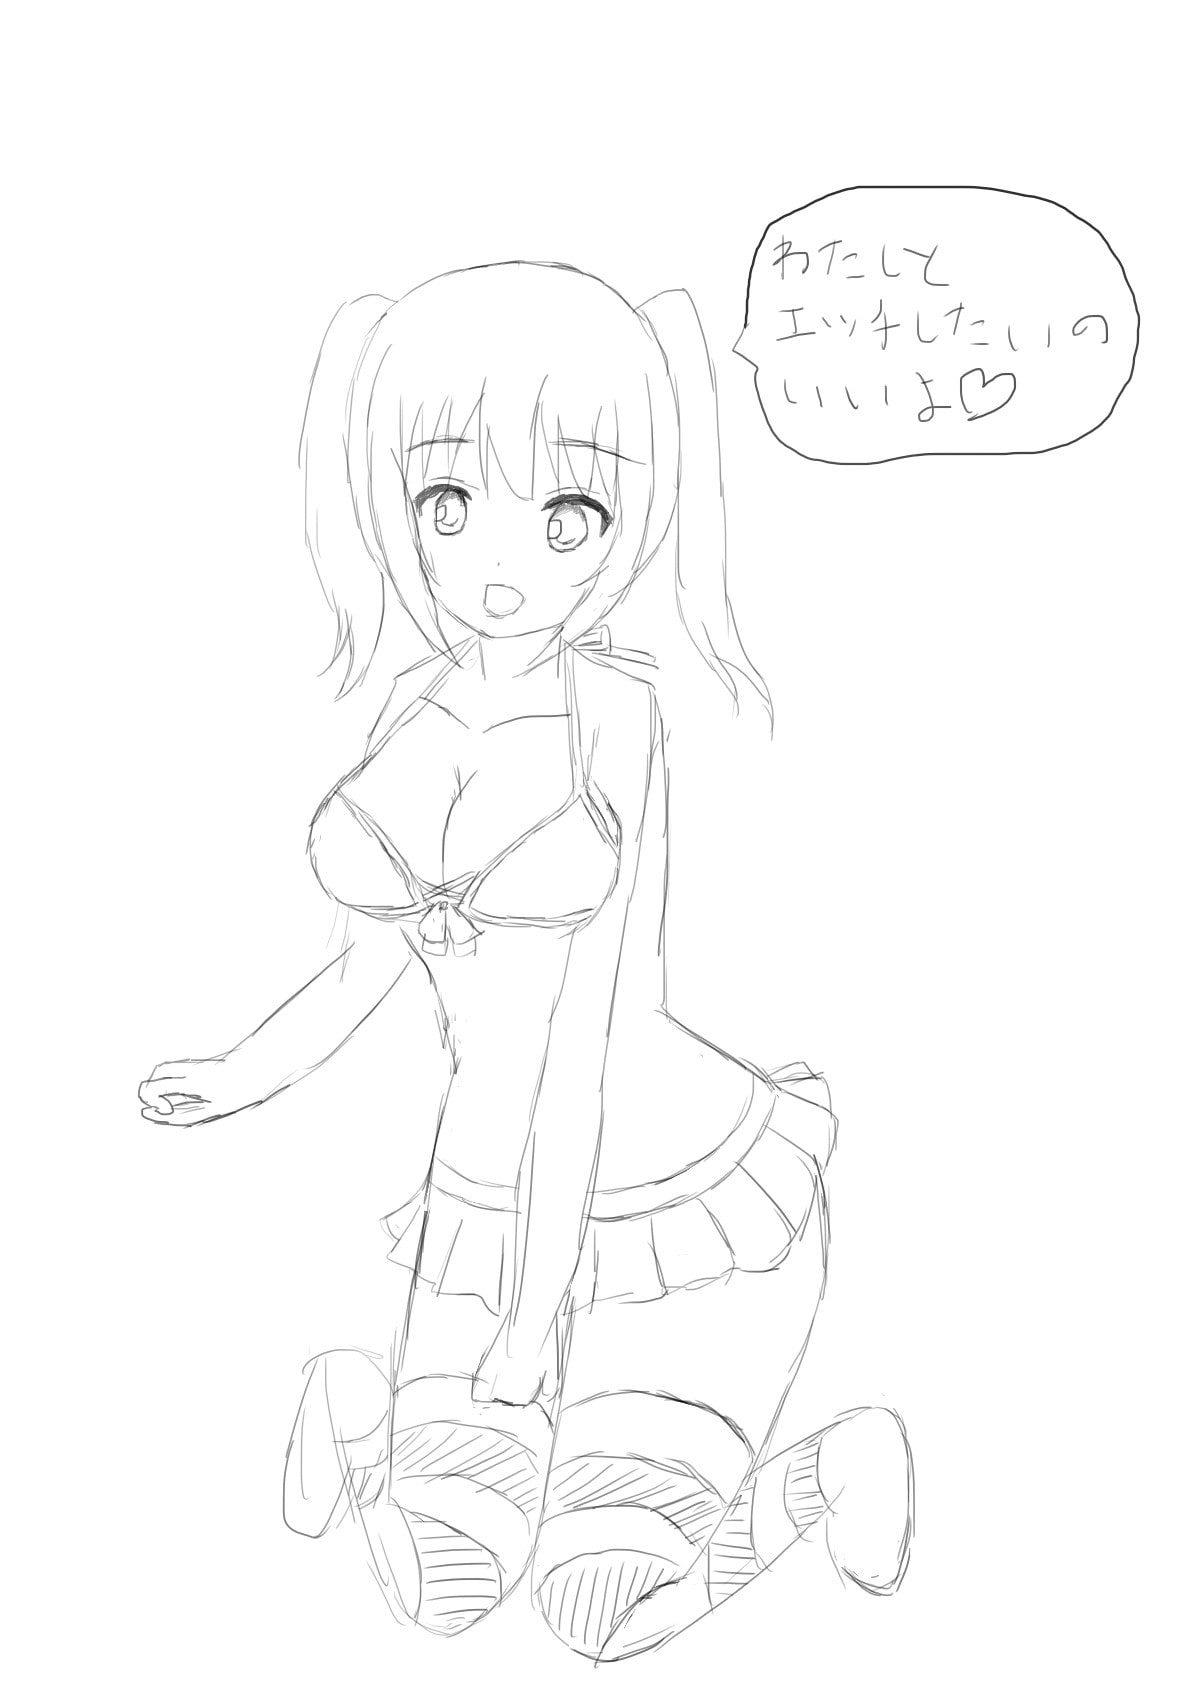 Daily Life in Harem City - Made a Cute Girl at the Pool Go Ahe Ahe